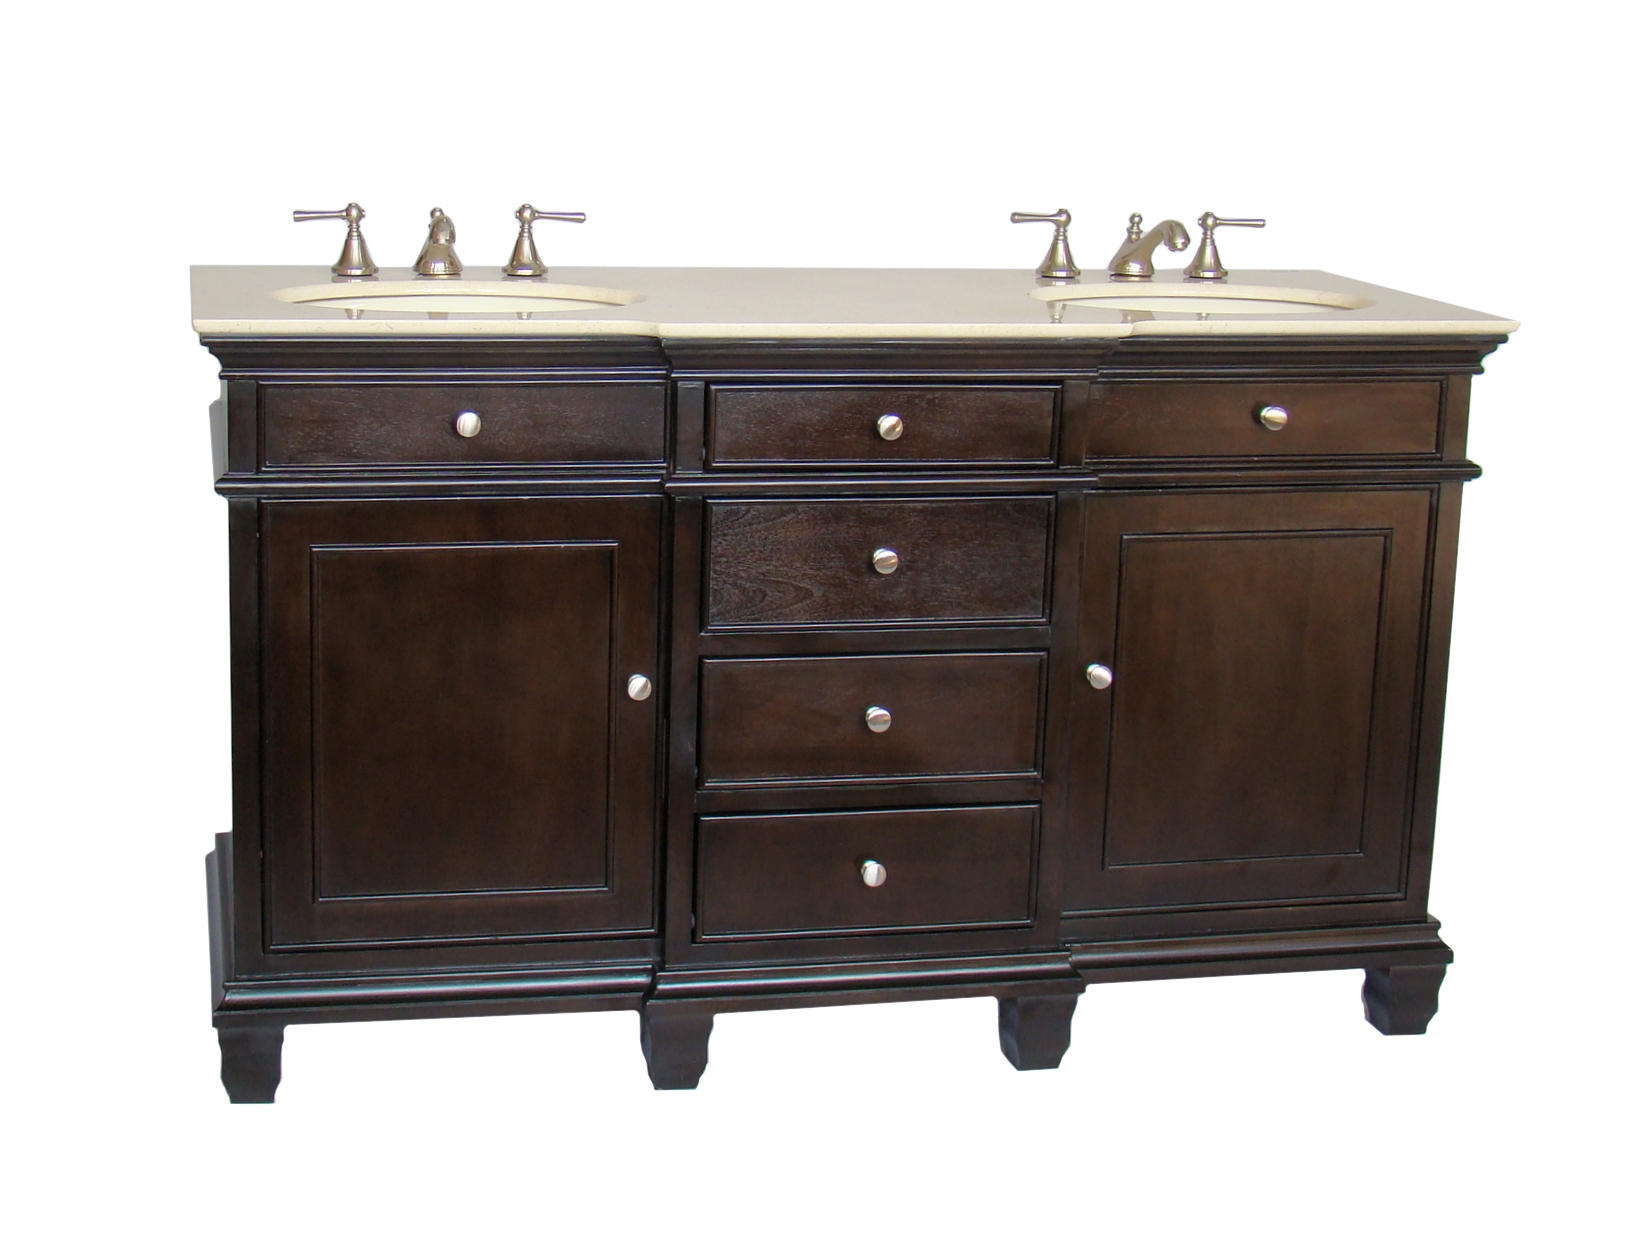 69 Inch Bathroom Vanity Without Top